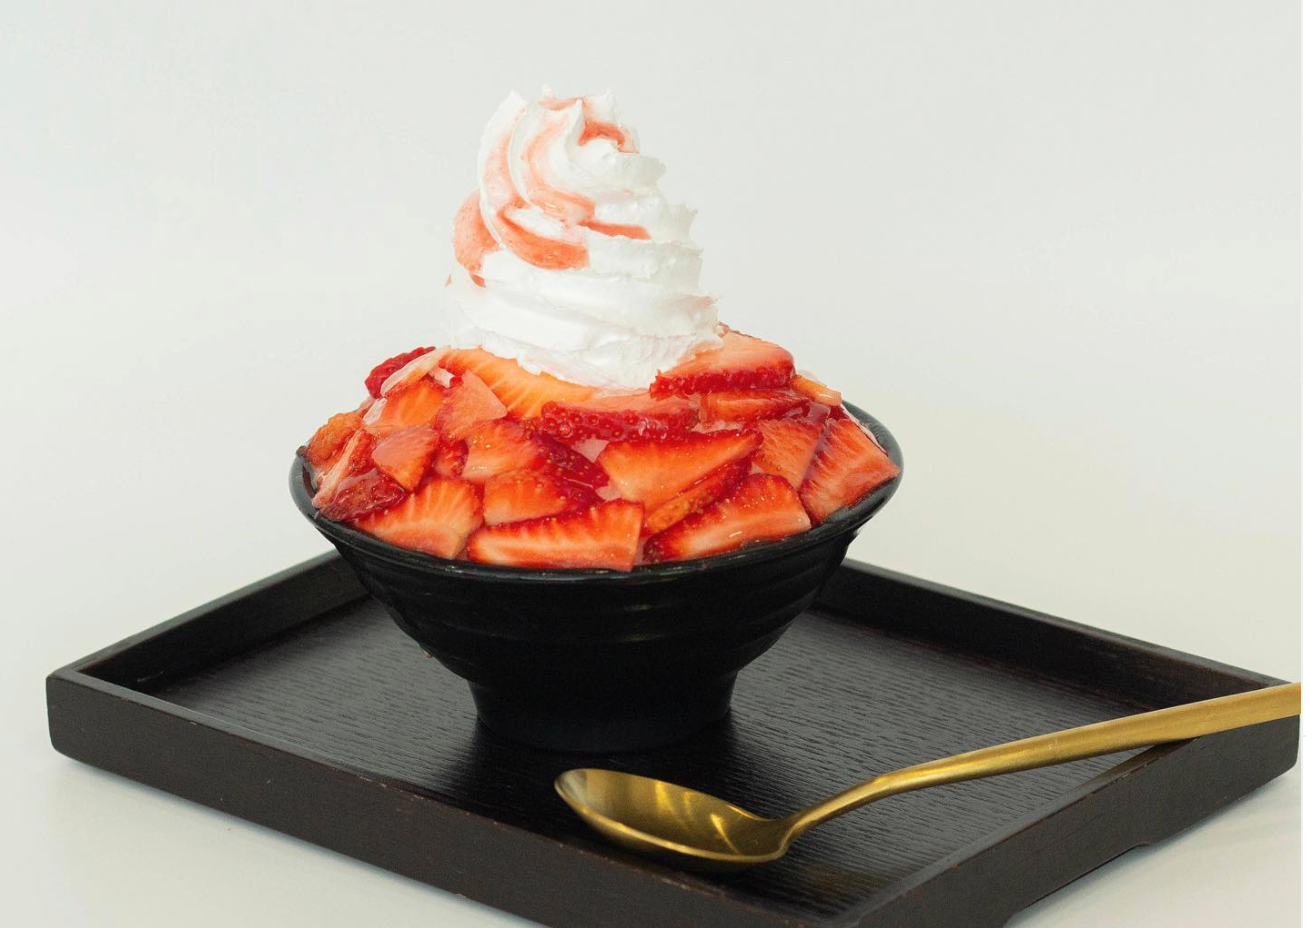 A bowl of shaved ice topped with sliced strawberries